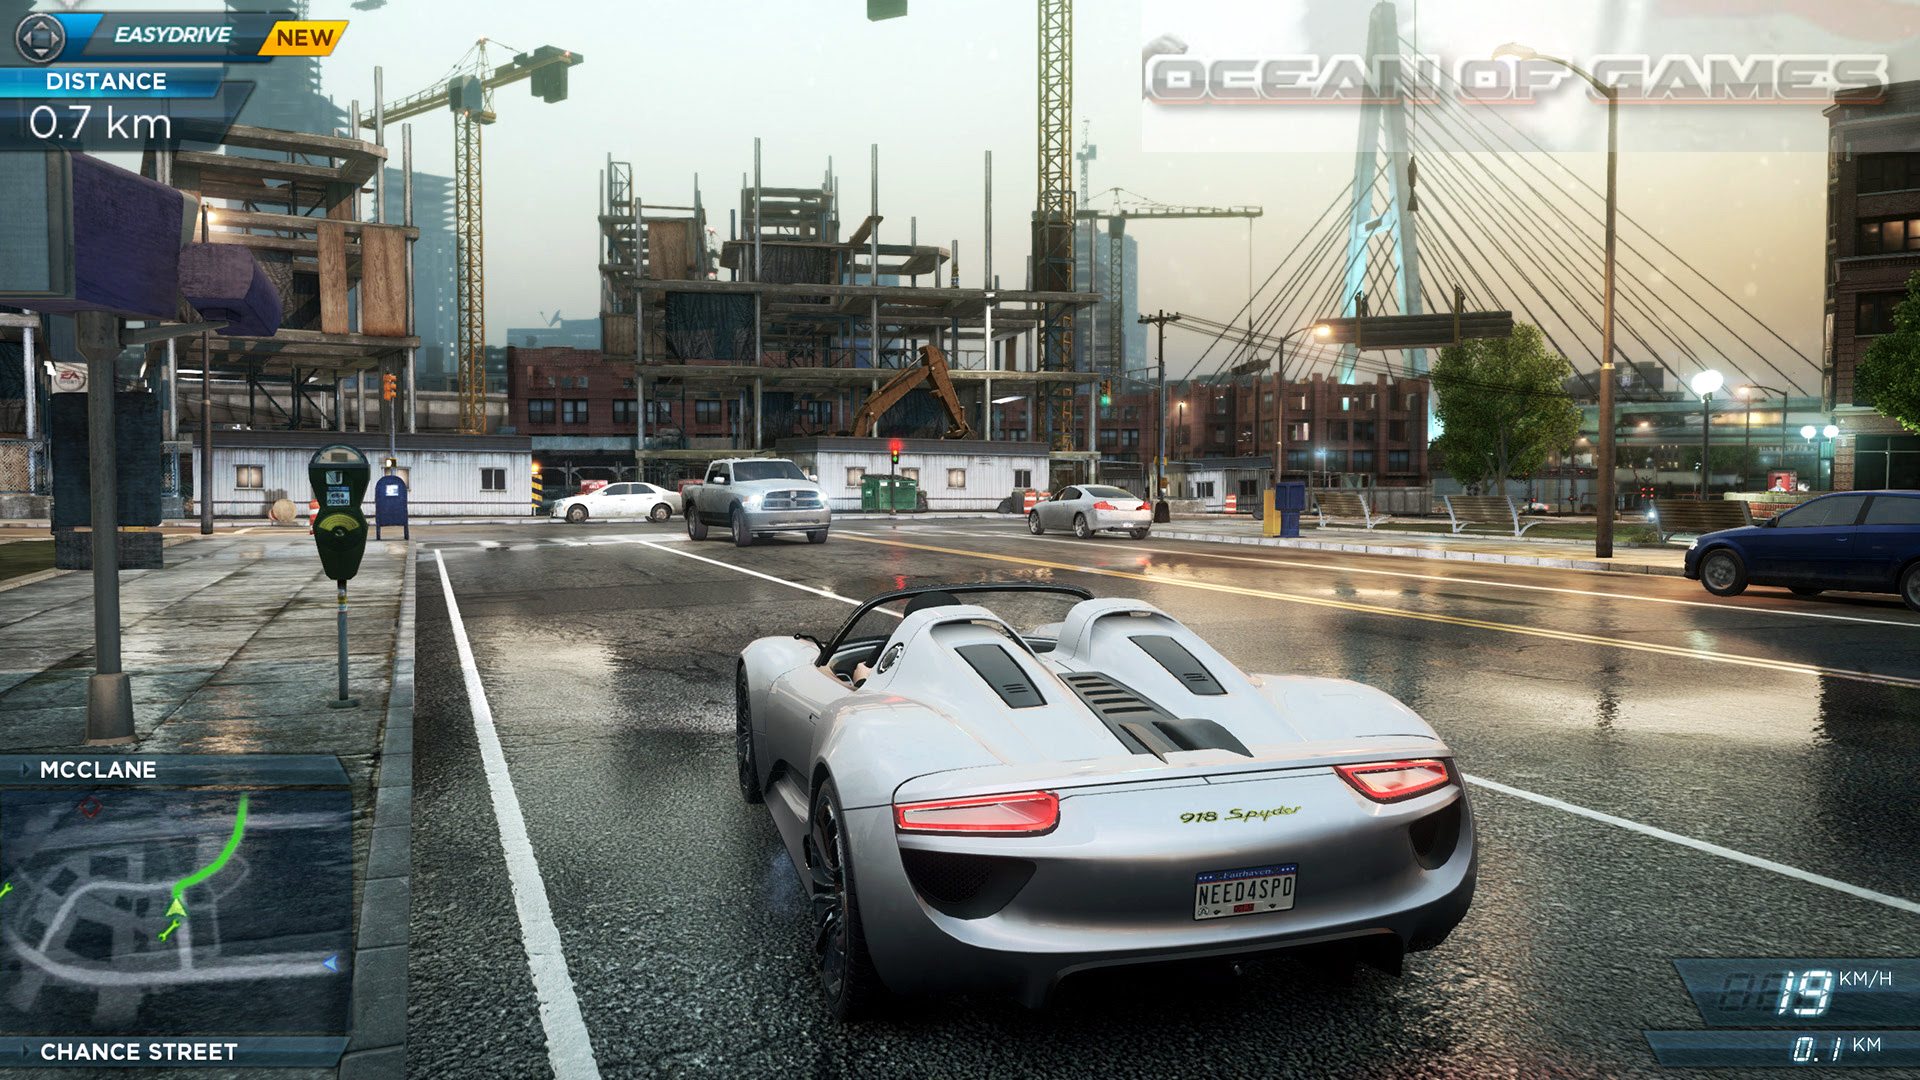 System Requirements of Need for Speed Most Wanted 2012 PC Game